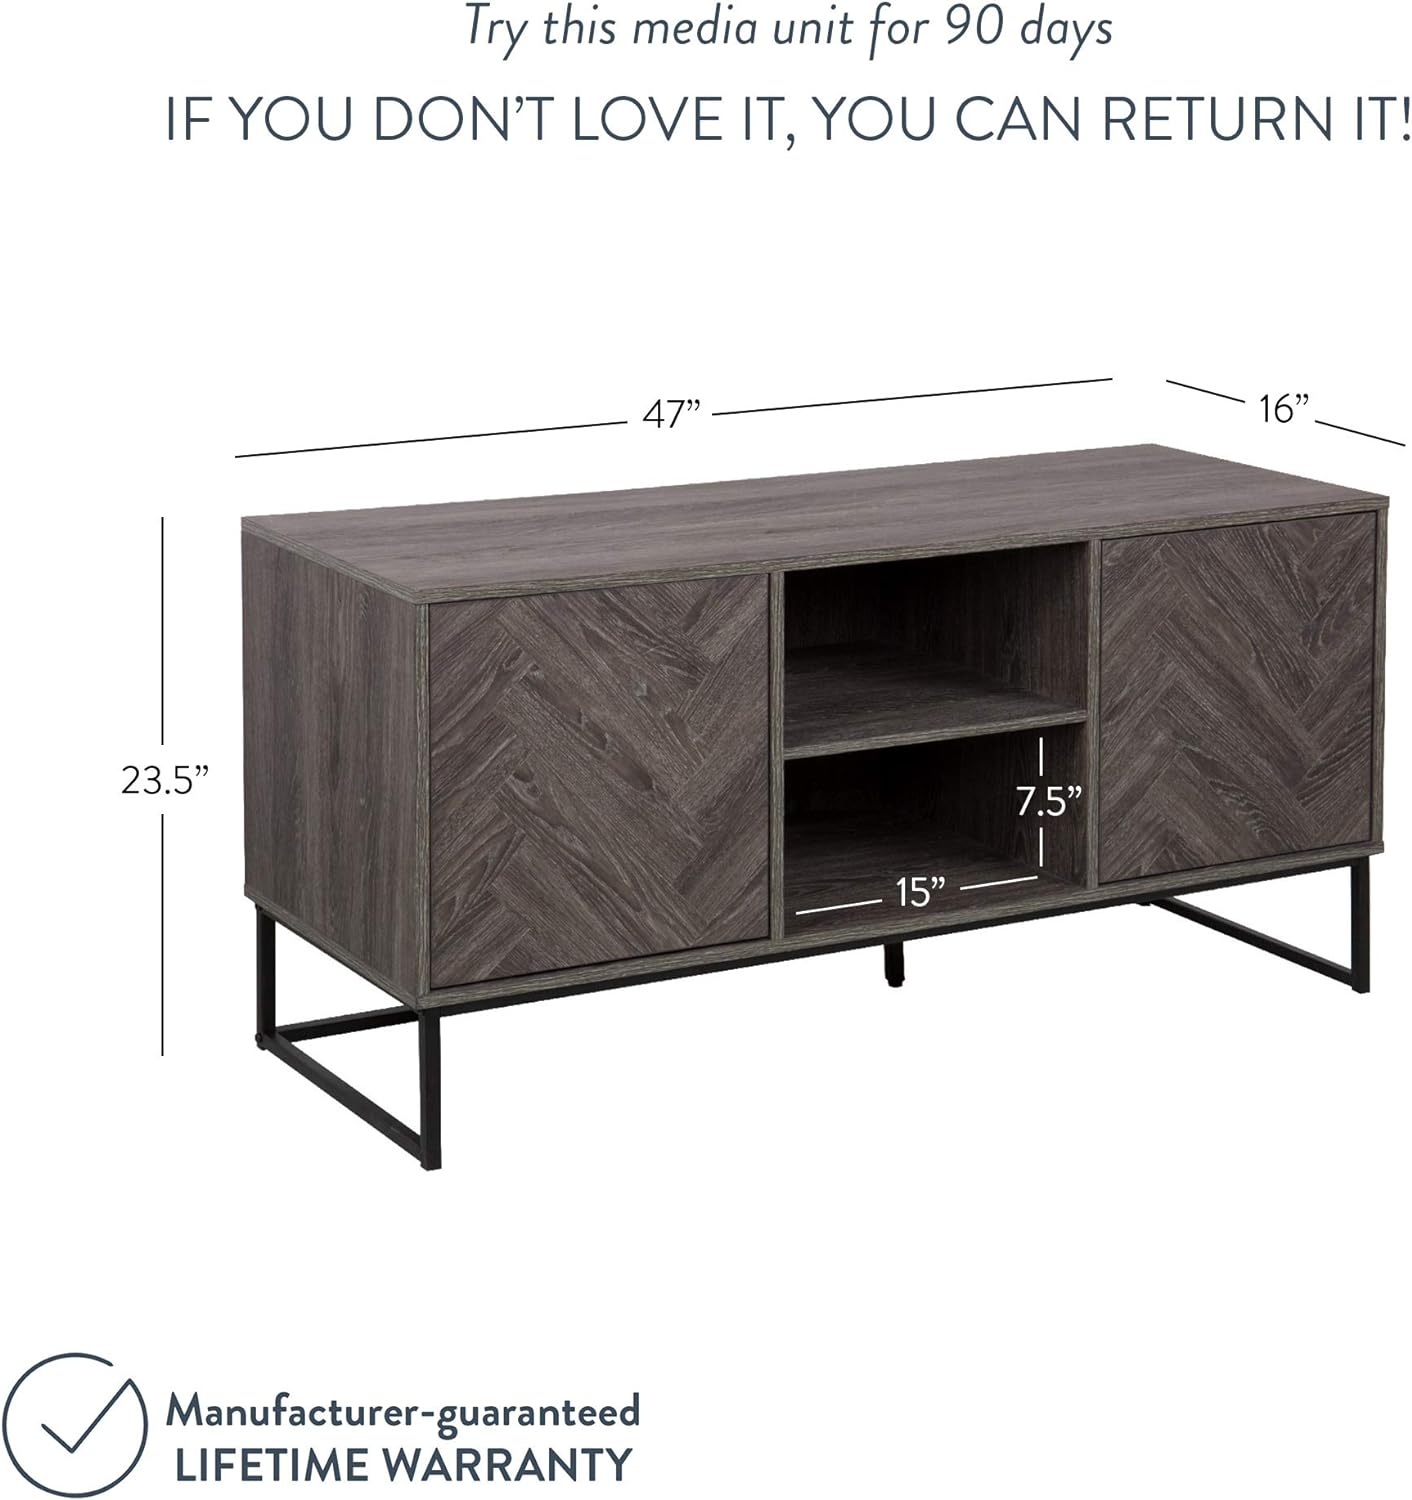 NEW - Nathan James Dylan Media Console Cabinet or TV Stand with Doors for Hidden Storage Herringbone Wood Pattern and Metal, Gray/Matte Black Length: 47" x Width: 16" x Height: 24" - Retail $169